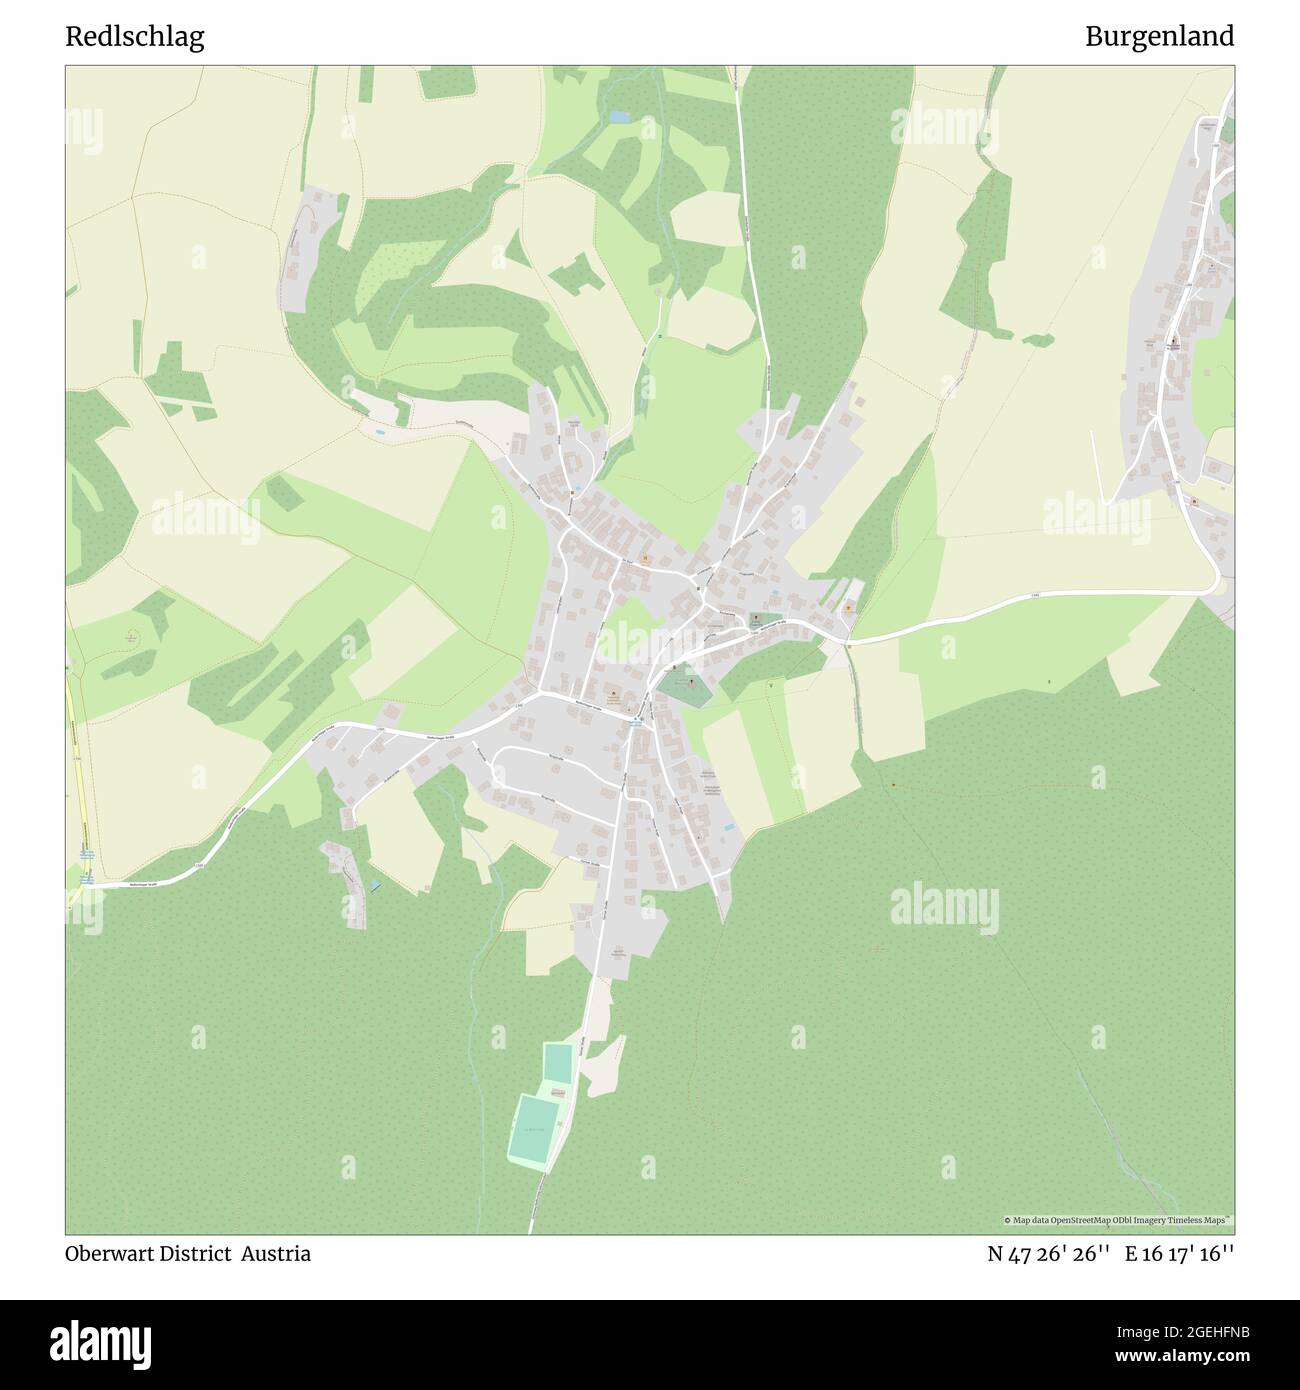 Redlschlag, Oberwart District, Austria, Burgenland, N 47 26' 26'', E 16 17' 16'', map, Timeless Map published in 2021. Travelers, explorers and adventurers like Florence Nightingale, David Livingstone, Ernest Shackleton, Lewis and Clark and Sherlock Holmes relied on maps to plan travels to the world's most remote corners, Timeless Maps is mapping most locations on the globe, showing the achievement of great dreams Stock Photo